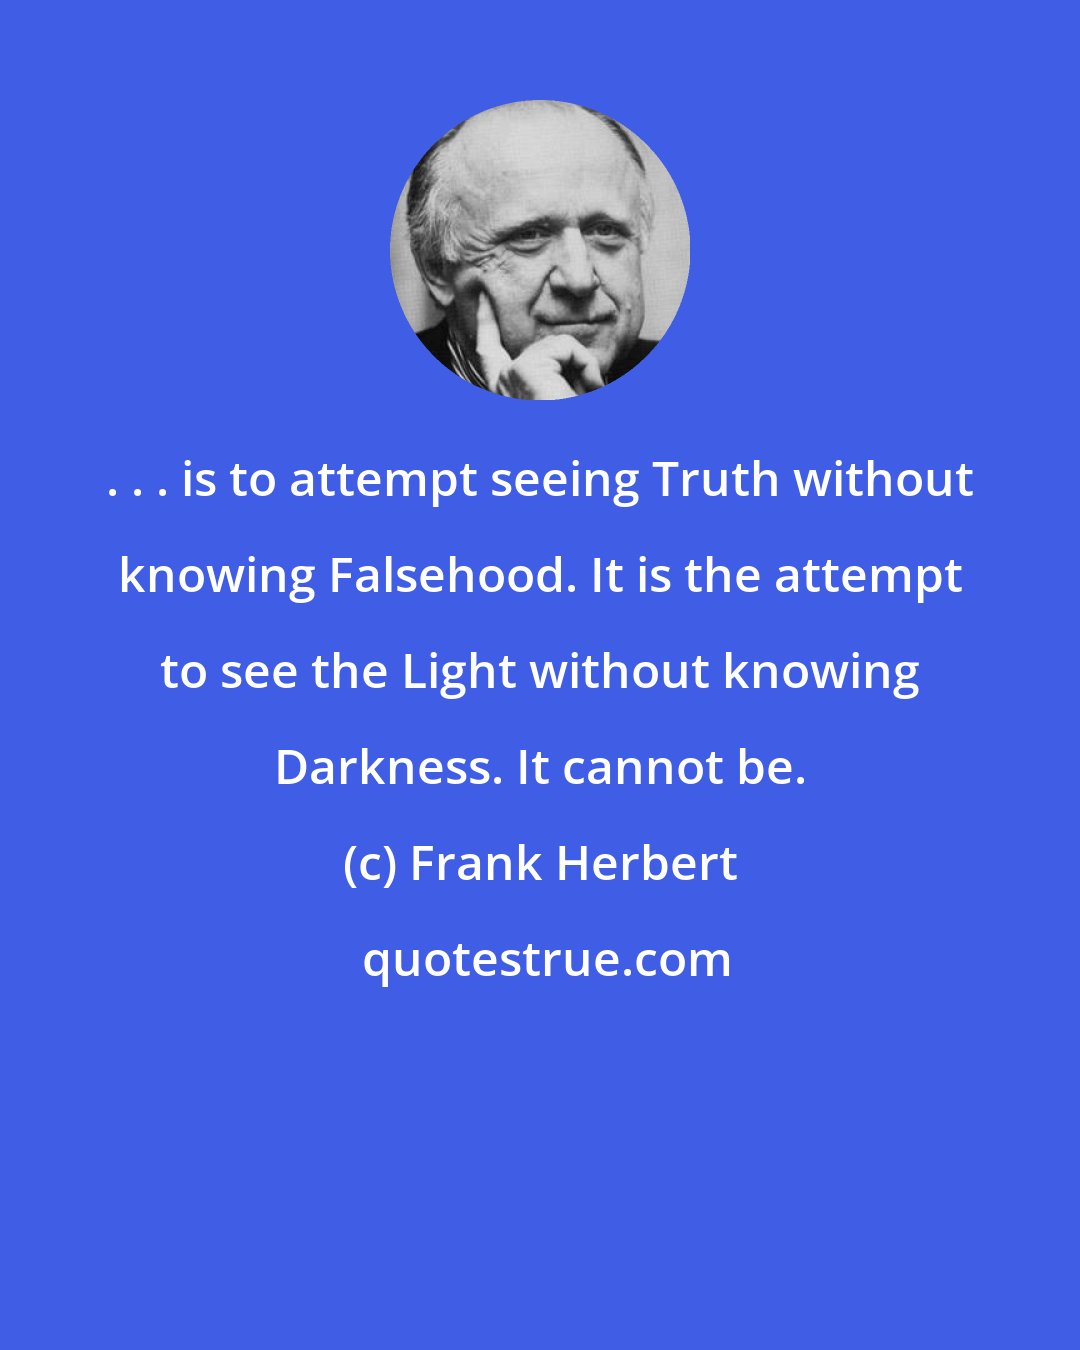 Frank Herbert: . . . is to attempt seeing Truth without knowing Falsehood. It is the attempt to see the Light without knowing Darkness. It cannot be.